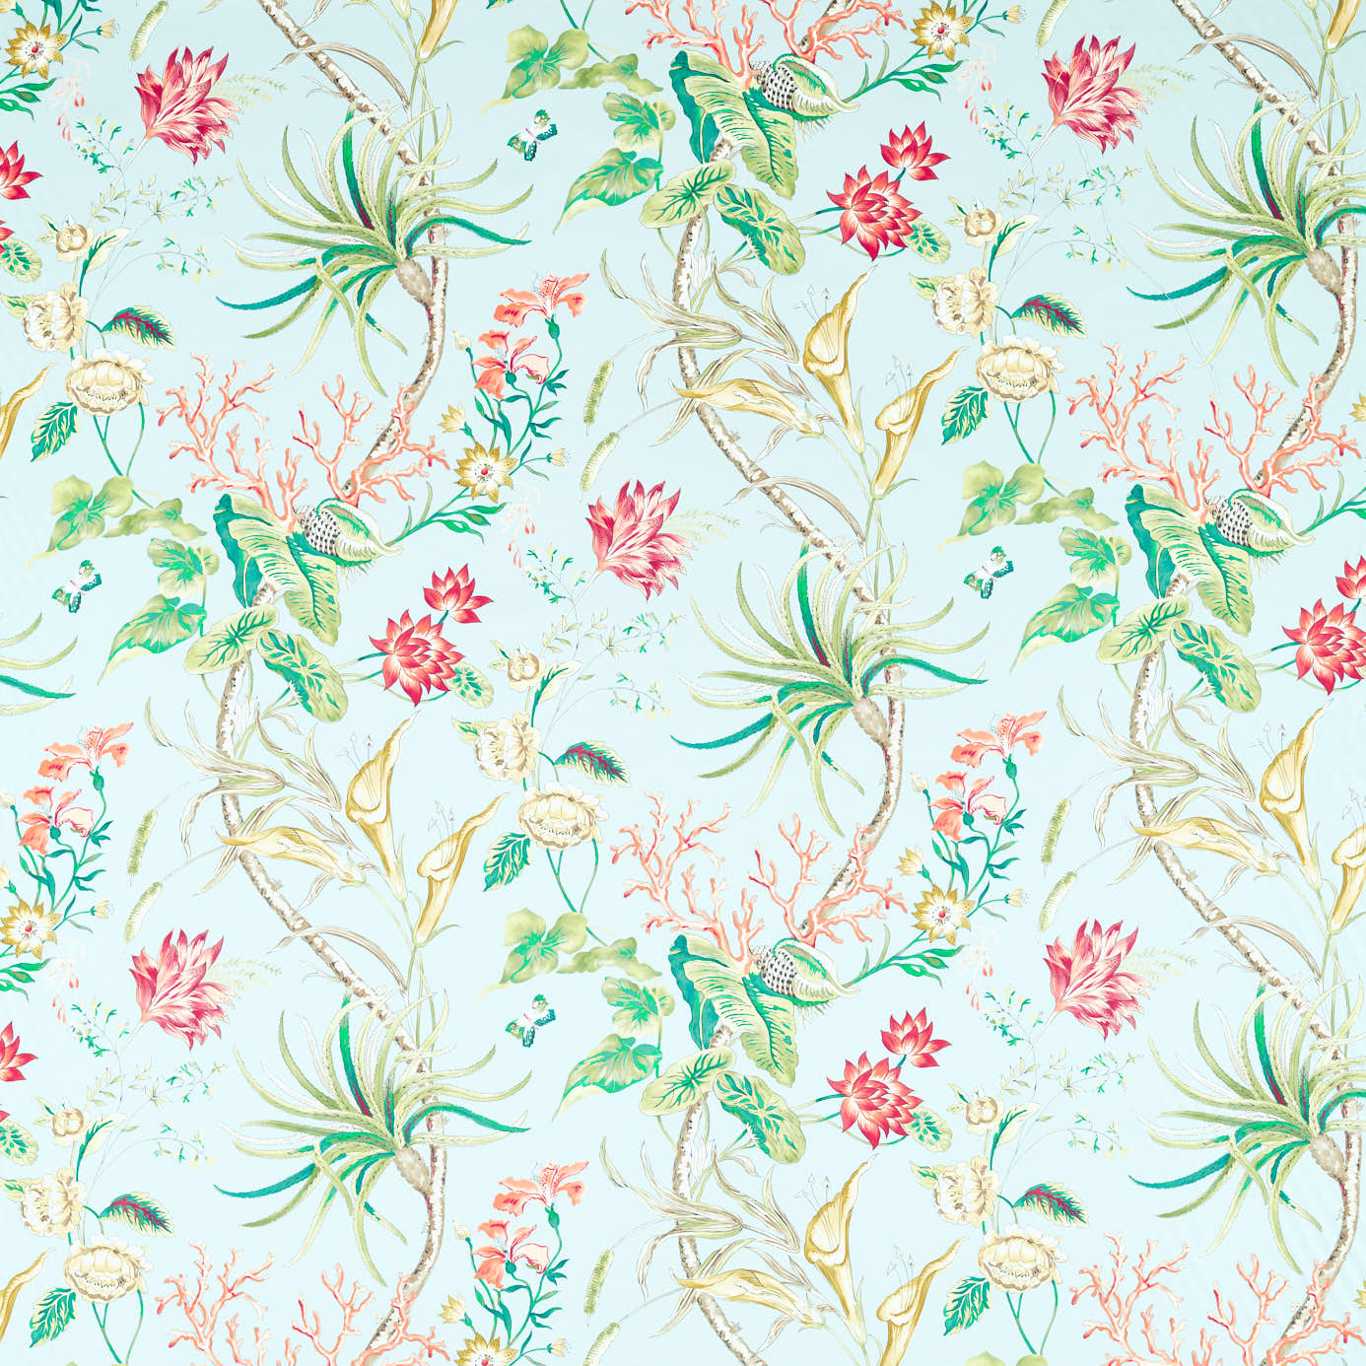 Mauritius Fabric by Sanderson